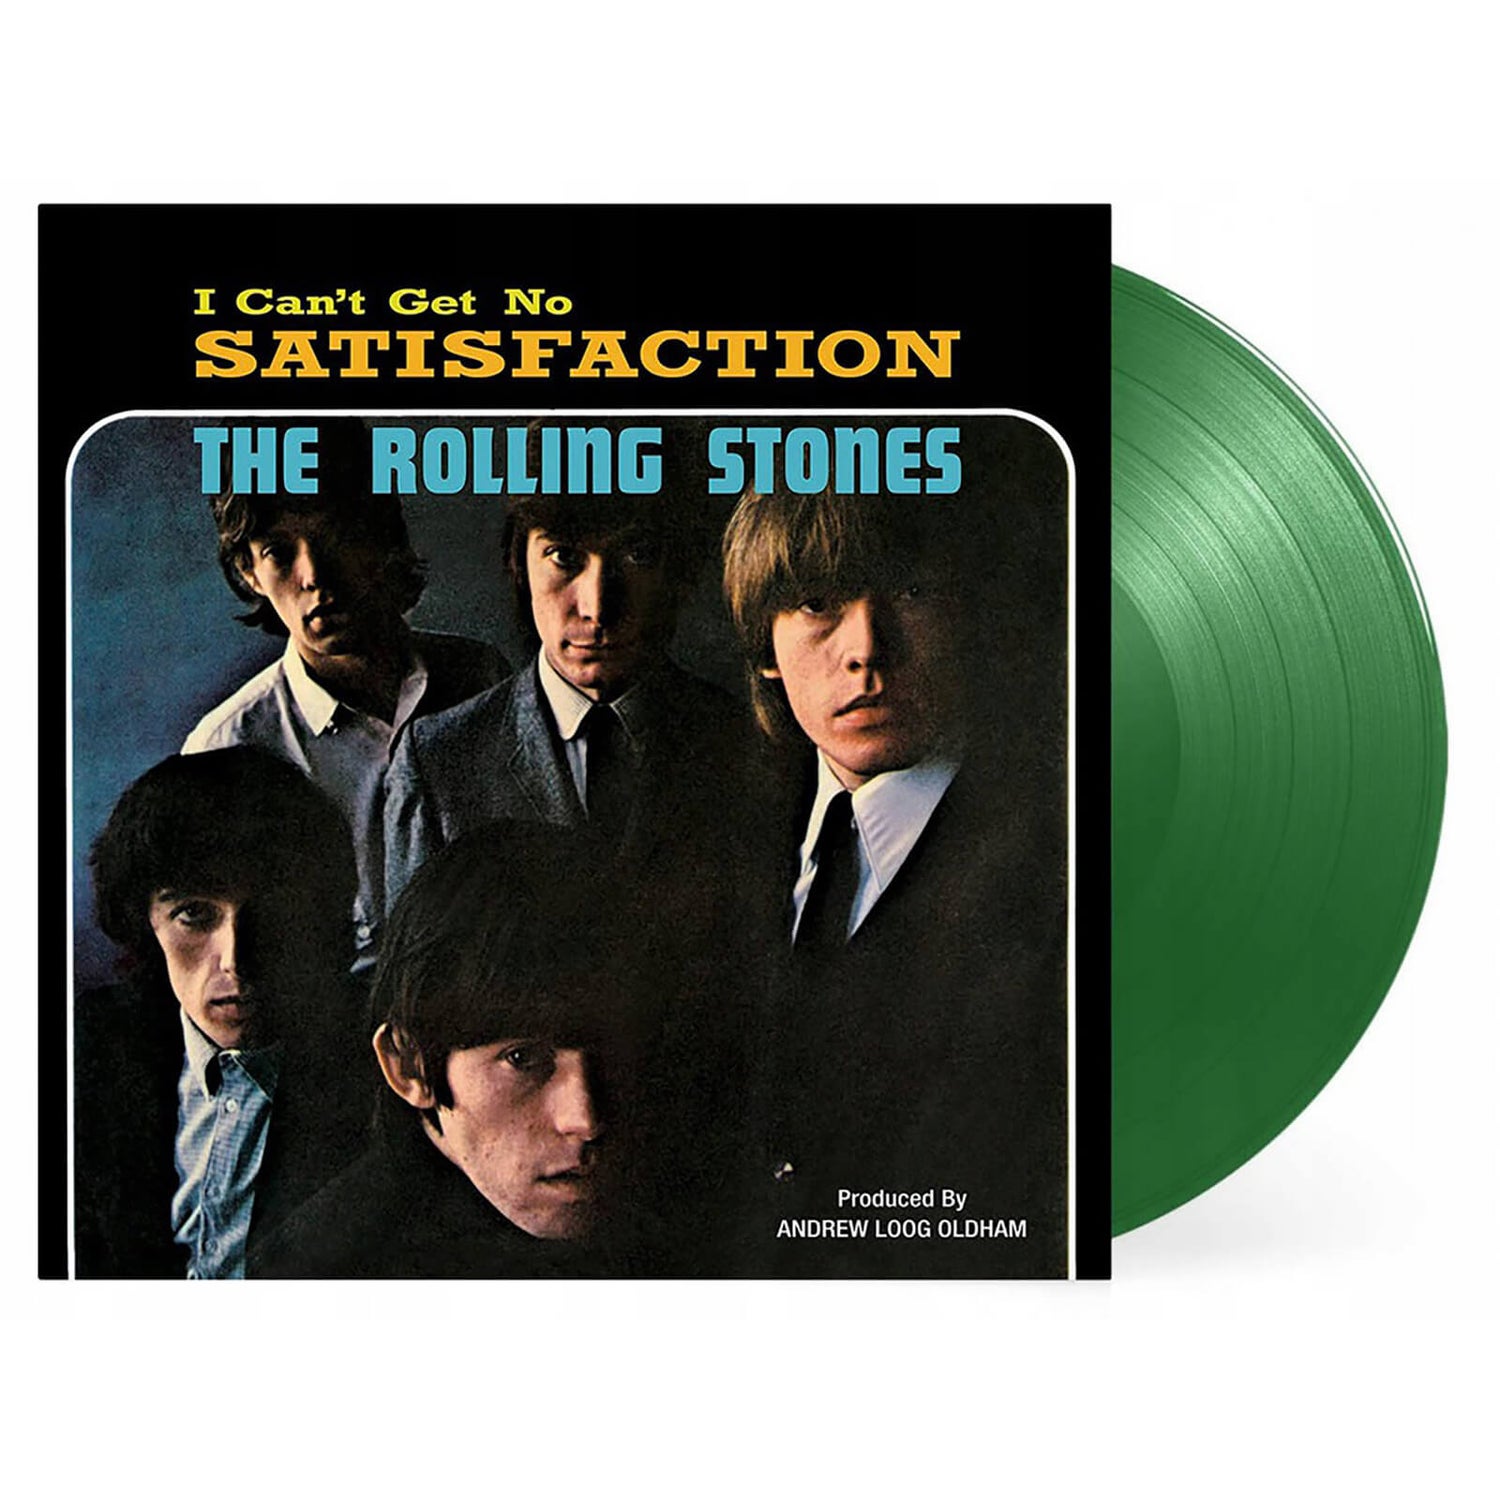 The Rolling Stones - (I Cant Get No) Satisfaction (55th Anniversary Edition) (Emerald Vinyl) 12"